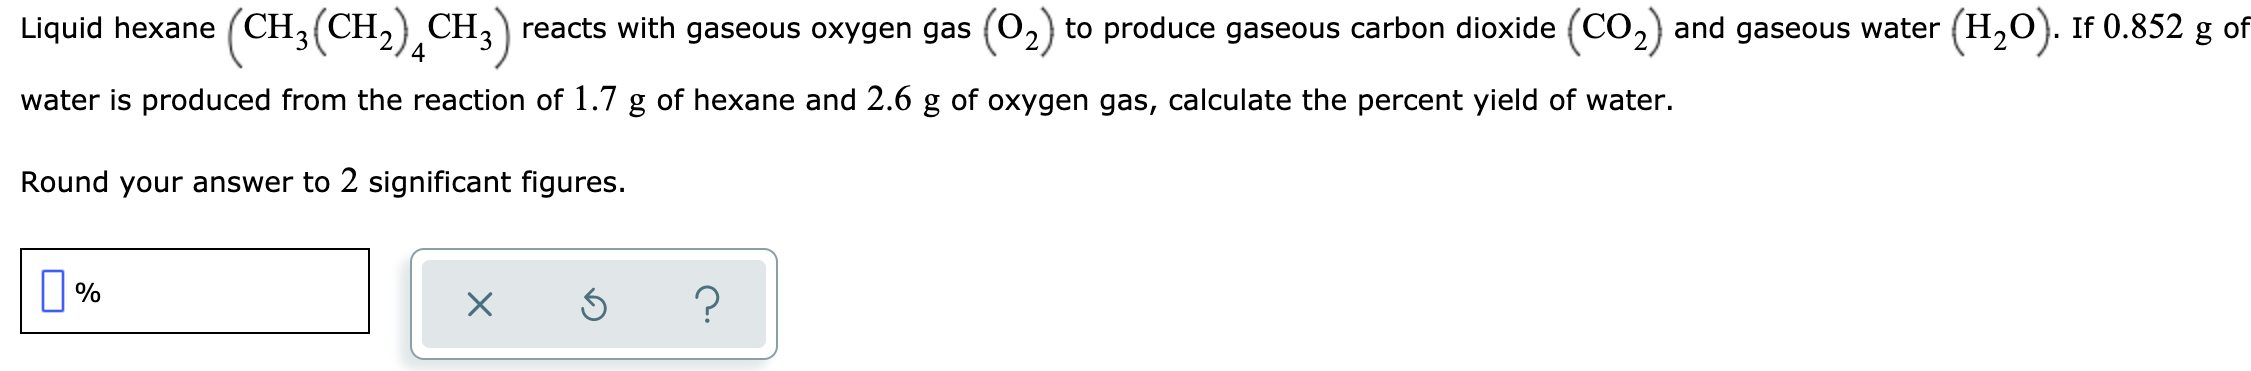 Liquid hexane (CH3(CH, CH,) reacts with gaseous oxygen gas (02
to produce gaseous carbon dioxide (CO,) and gaseous water (H,O). If 0.852 g of
water is produced from the reaction of 1.7 g of hexane and 2.6 g of oxygen gas, calculate the percent yield of water.
Round your answer to 2 significant figures.
